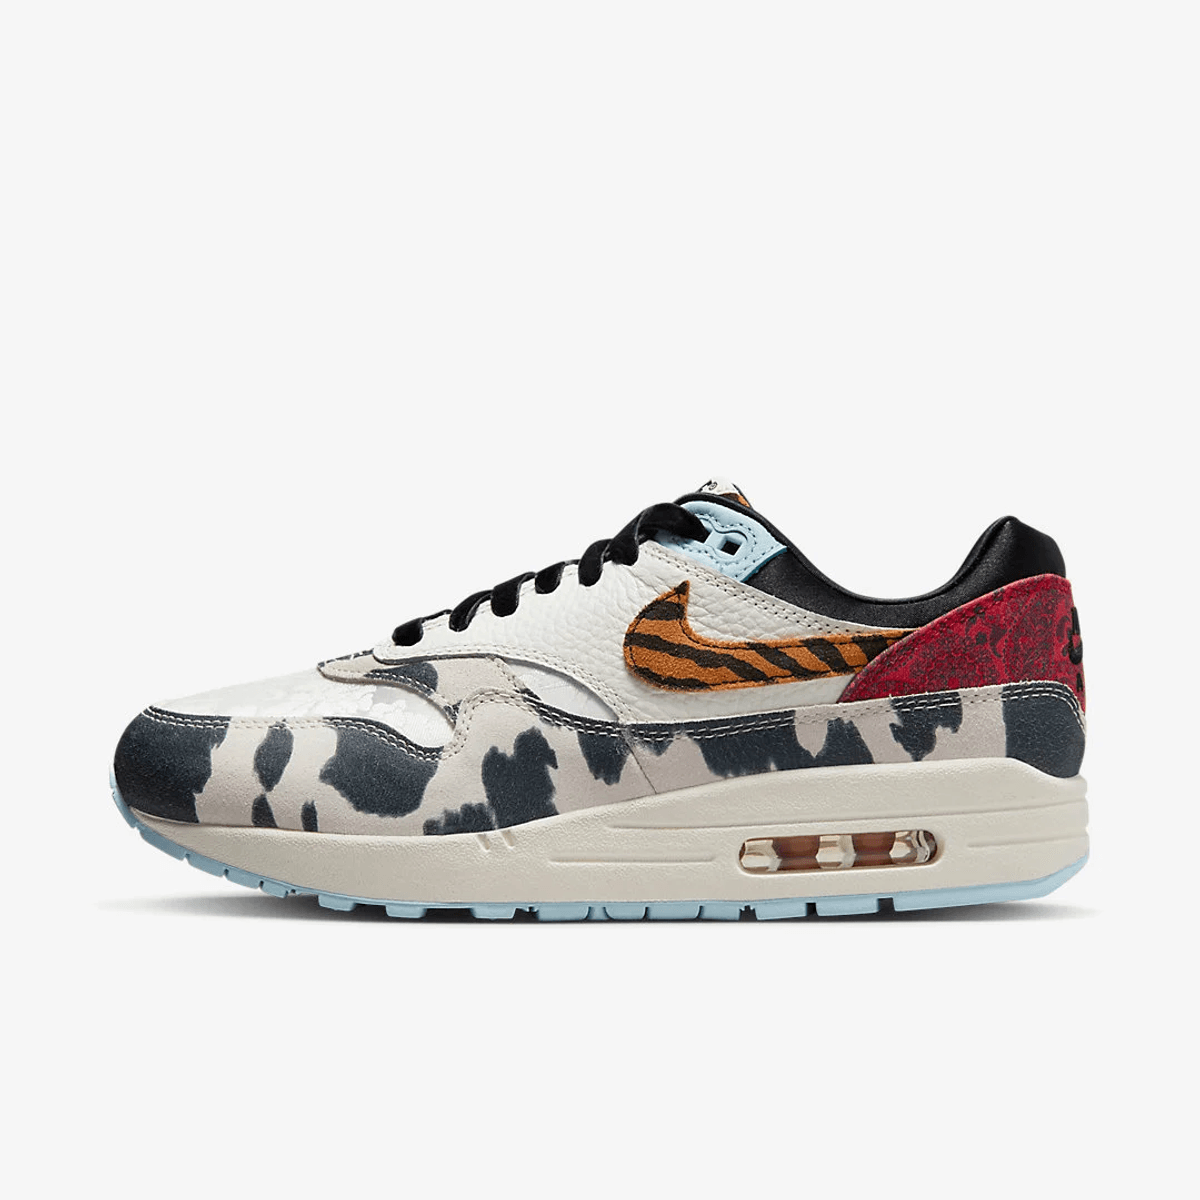 The Nike Air Max 1 '87 Great Indoors Releases This Month